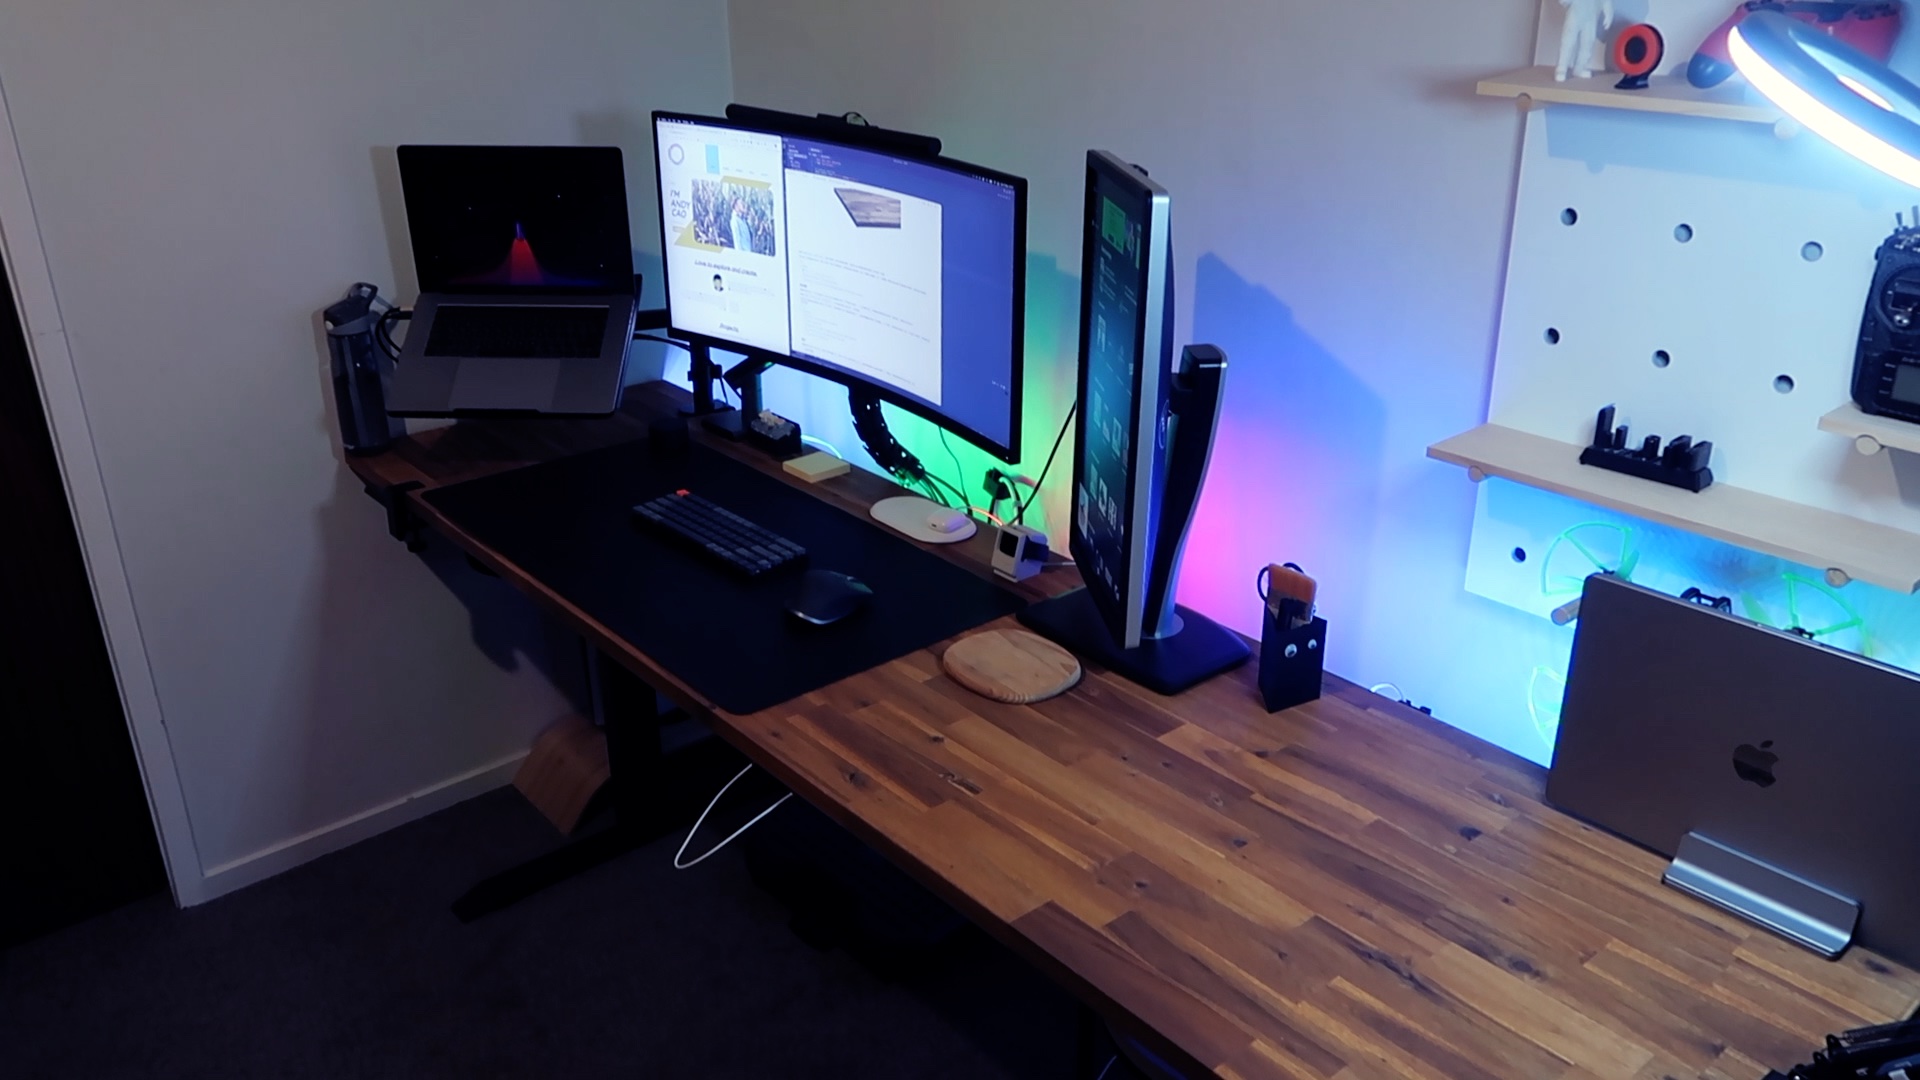 The super big desk is one satisfying part of my setups